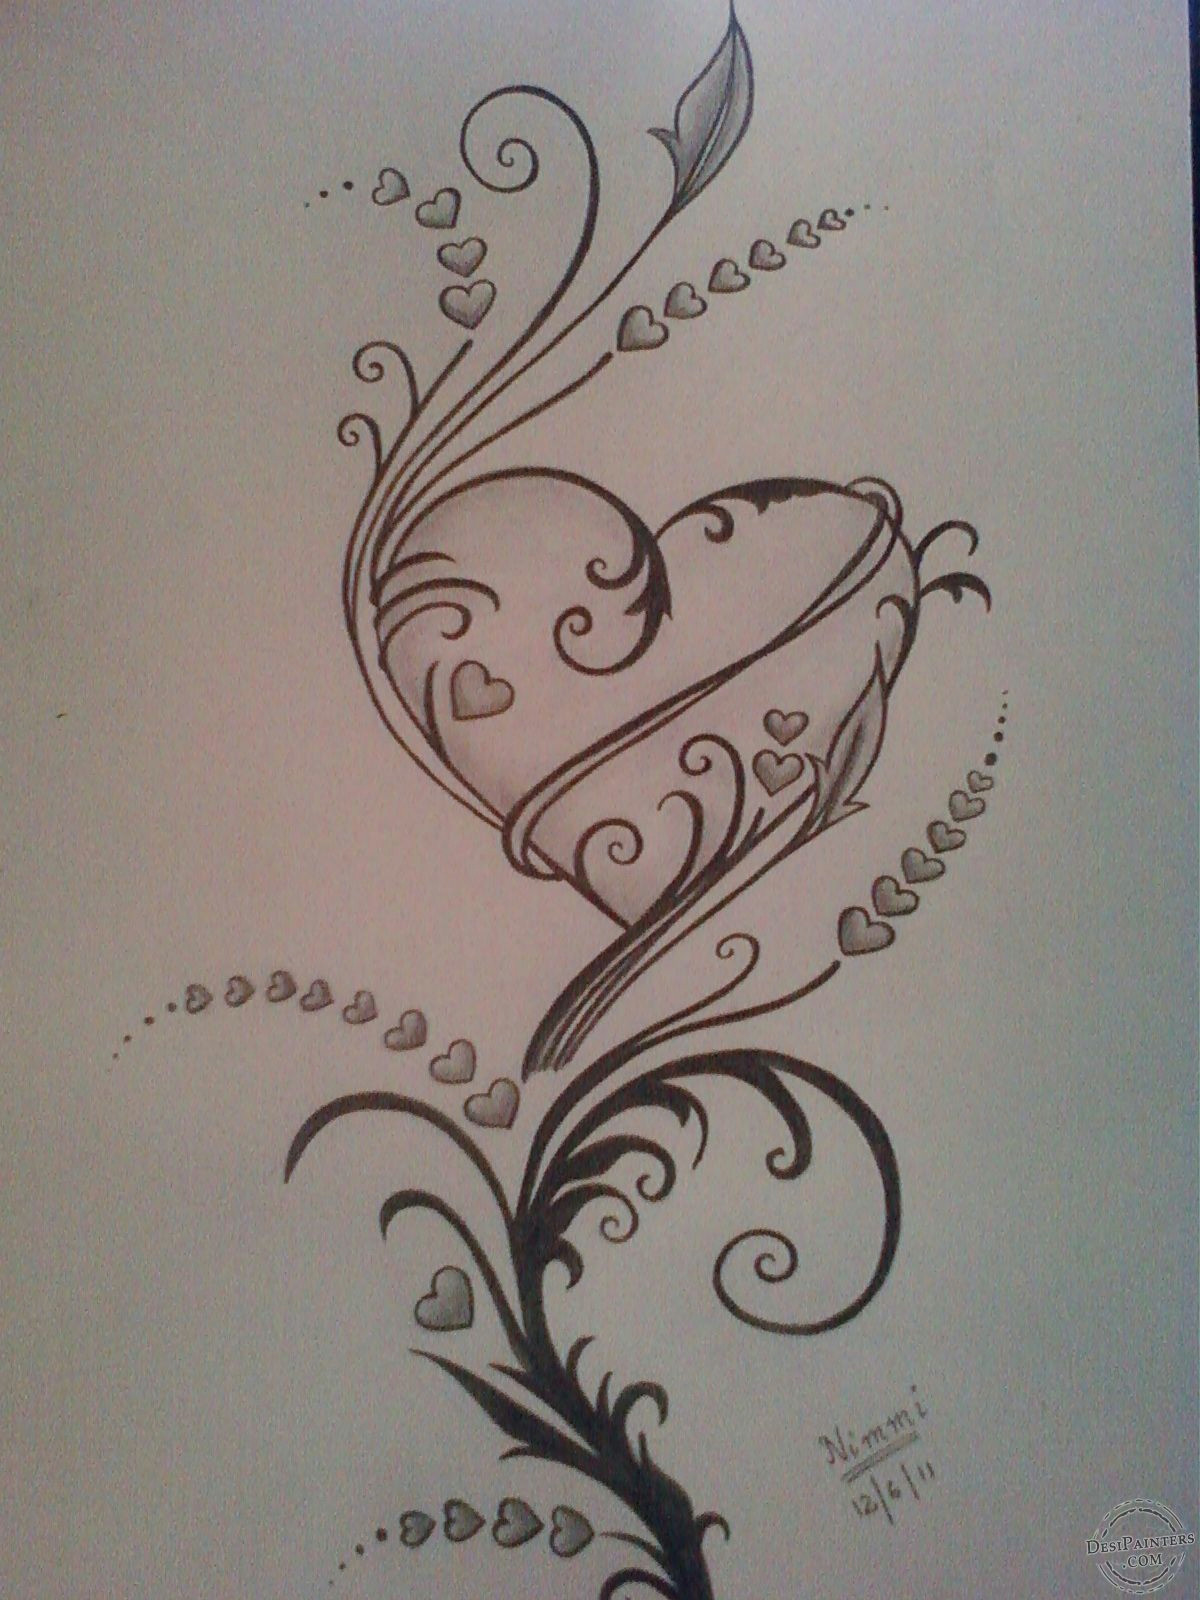 Simple Line Drawing Of A Heart Pencil Sketches Hearts Love Pictures Of Drawing Sketch Tattoos